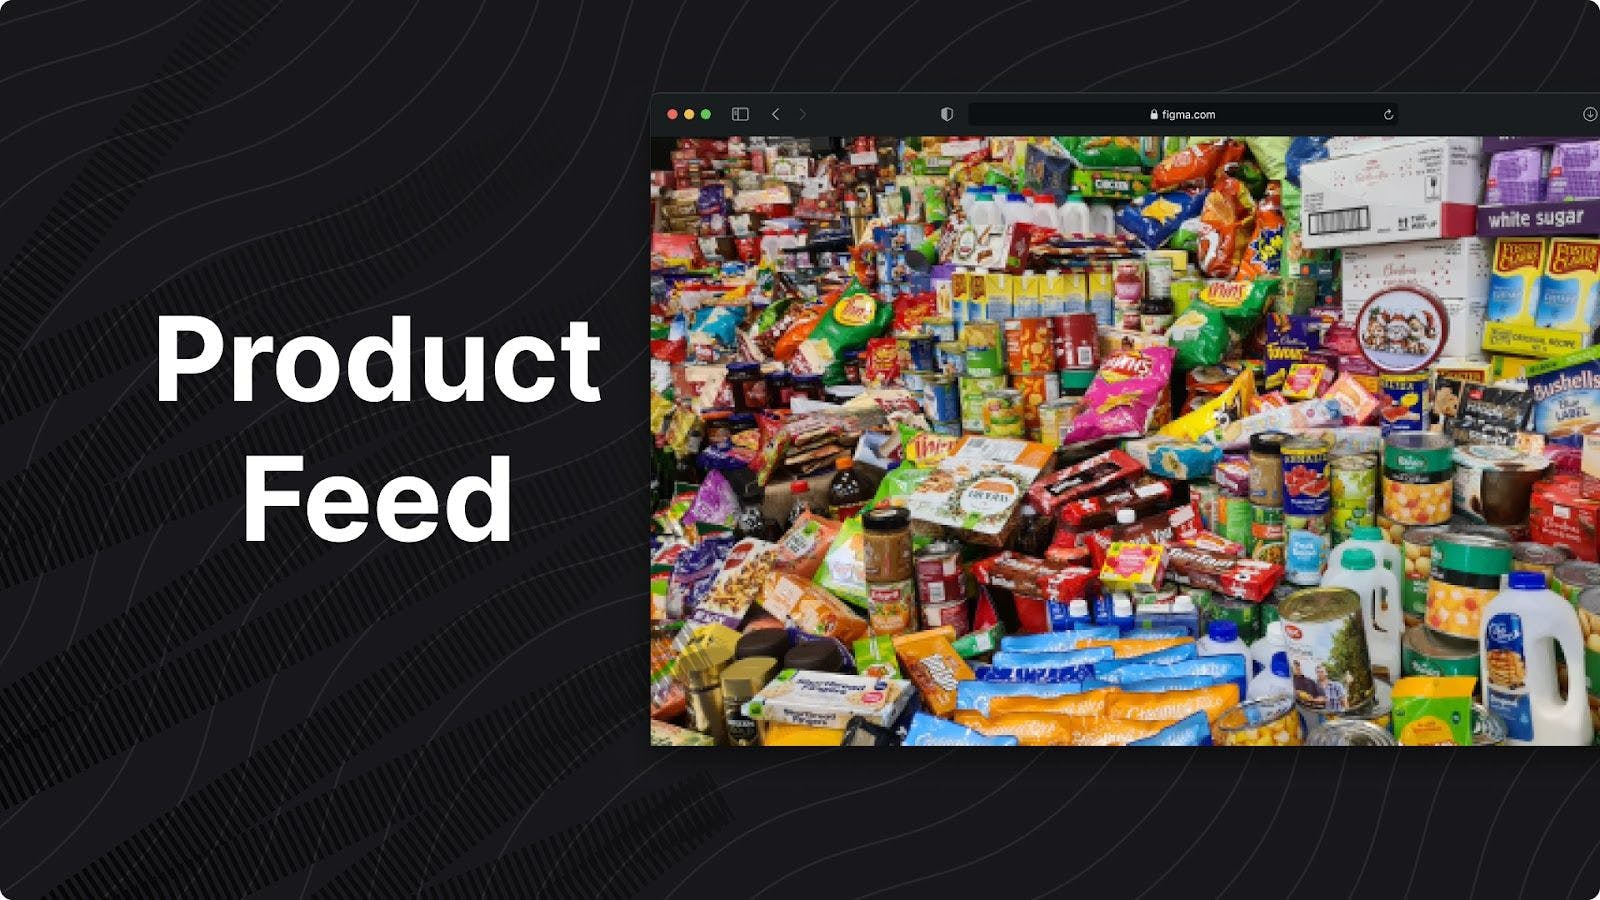 Product Feed: Simplifying eCommerce Campaign Launches